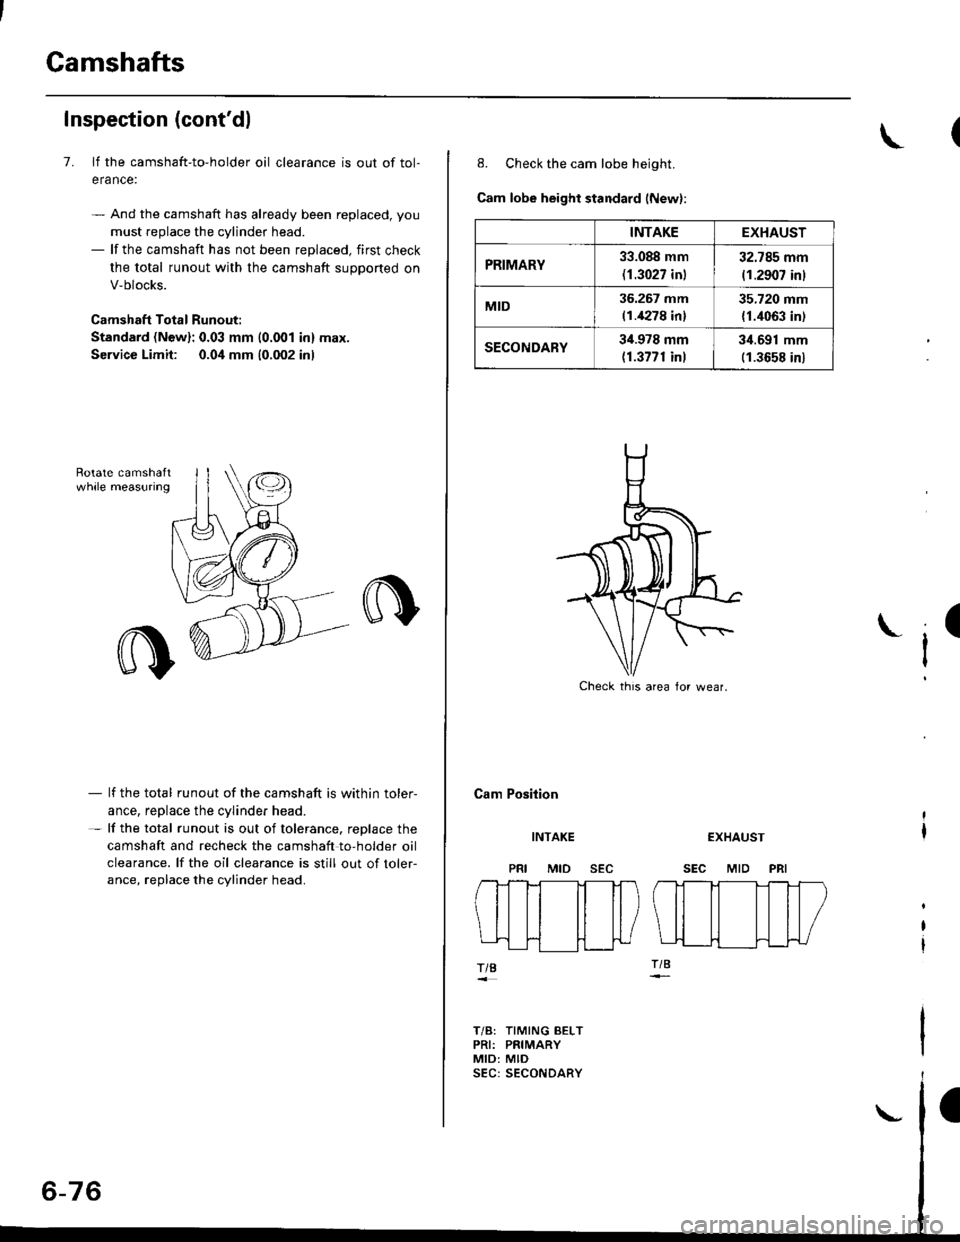 HONDA CIVIC 1996 6.G Service Manual Gamshafts
Inspection (contdl
7. lf the camshaft-to-holder oil clearance is out of tol-
erance:
- And the camshaft has already been replaced, you
must replace the cylinder head.- lf the camshaft has n